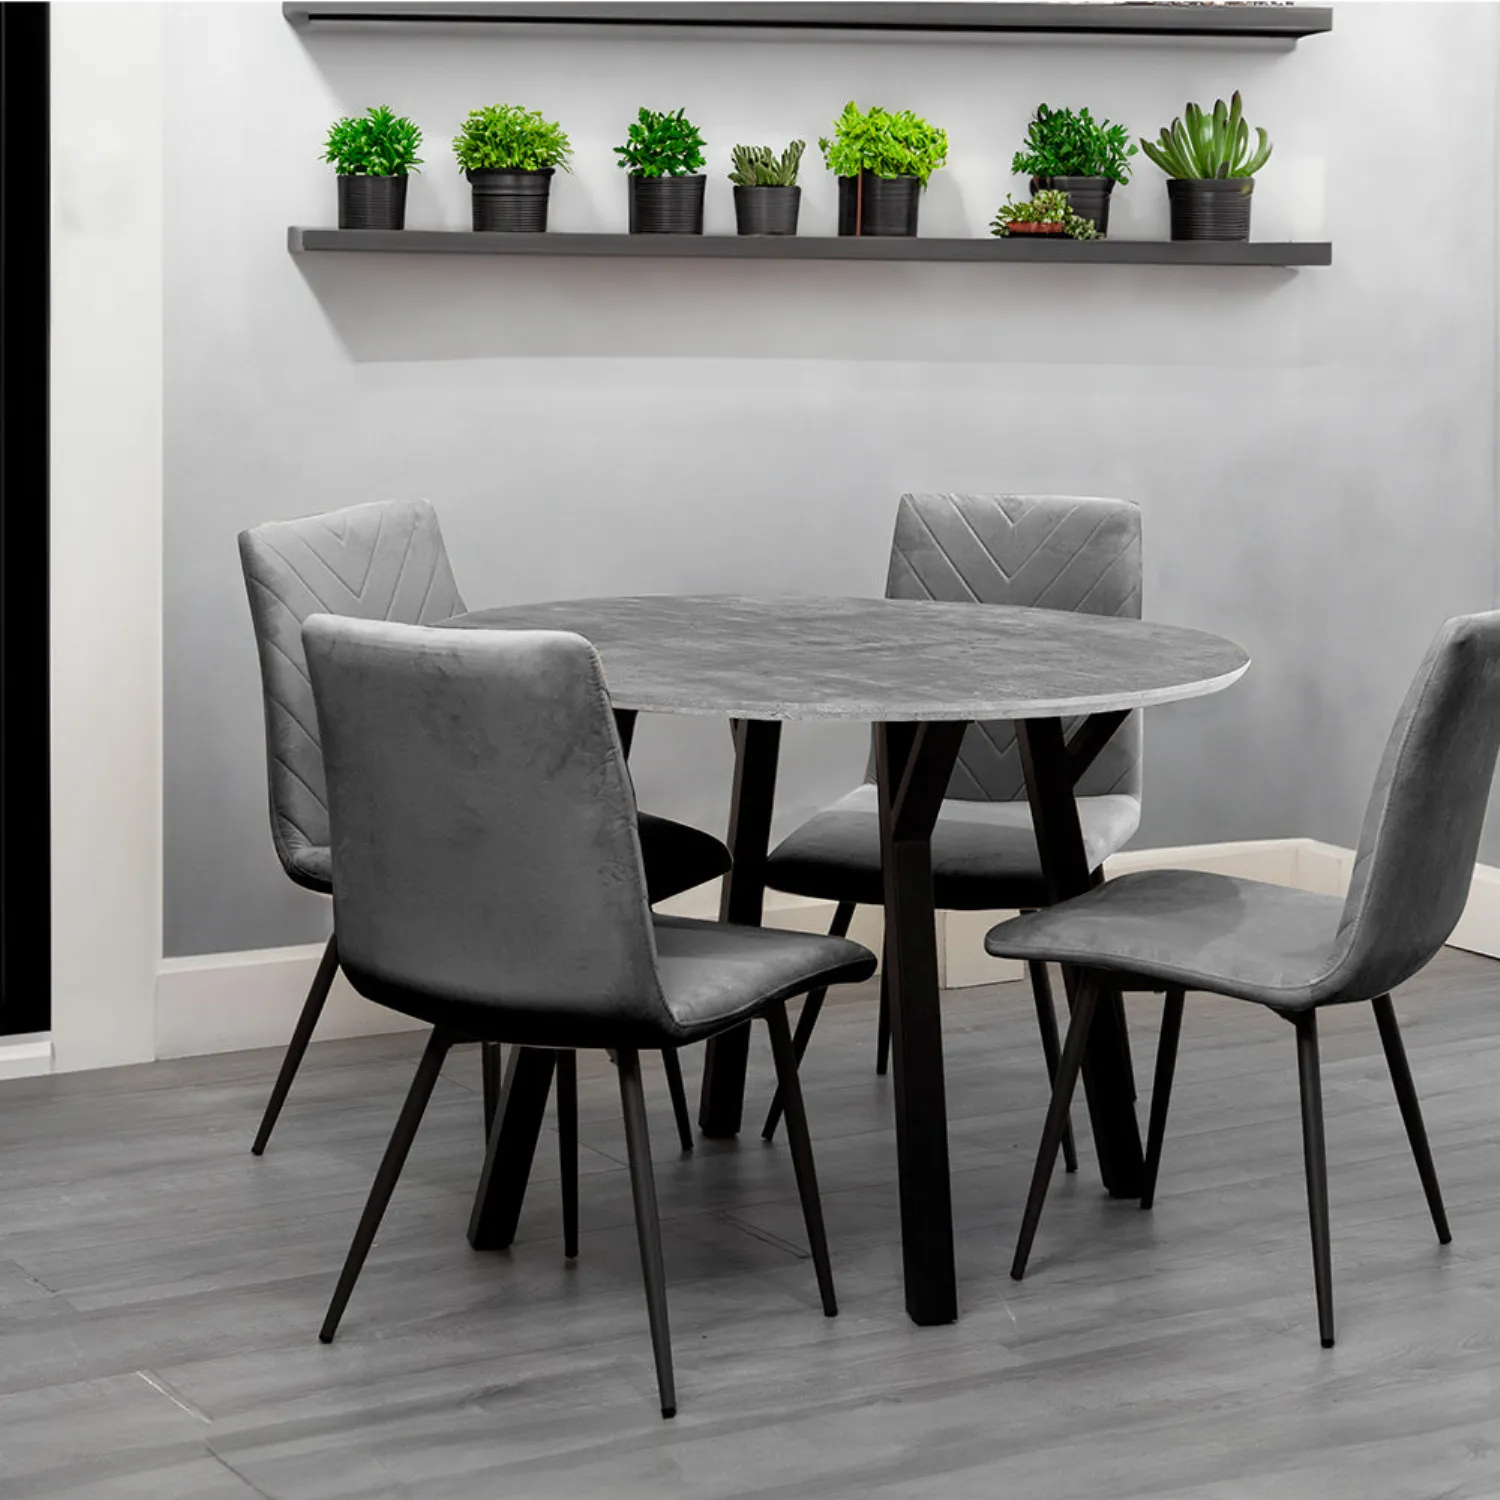 Dining Set 1.1m Concrete Round Table And 4 x Grey Chairs